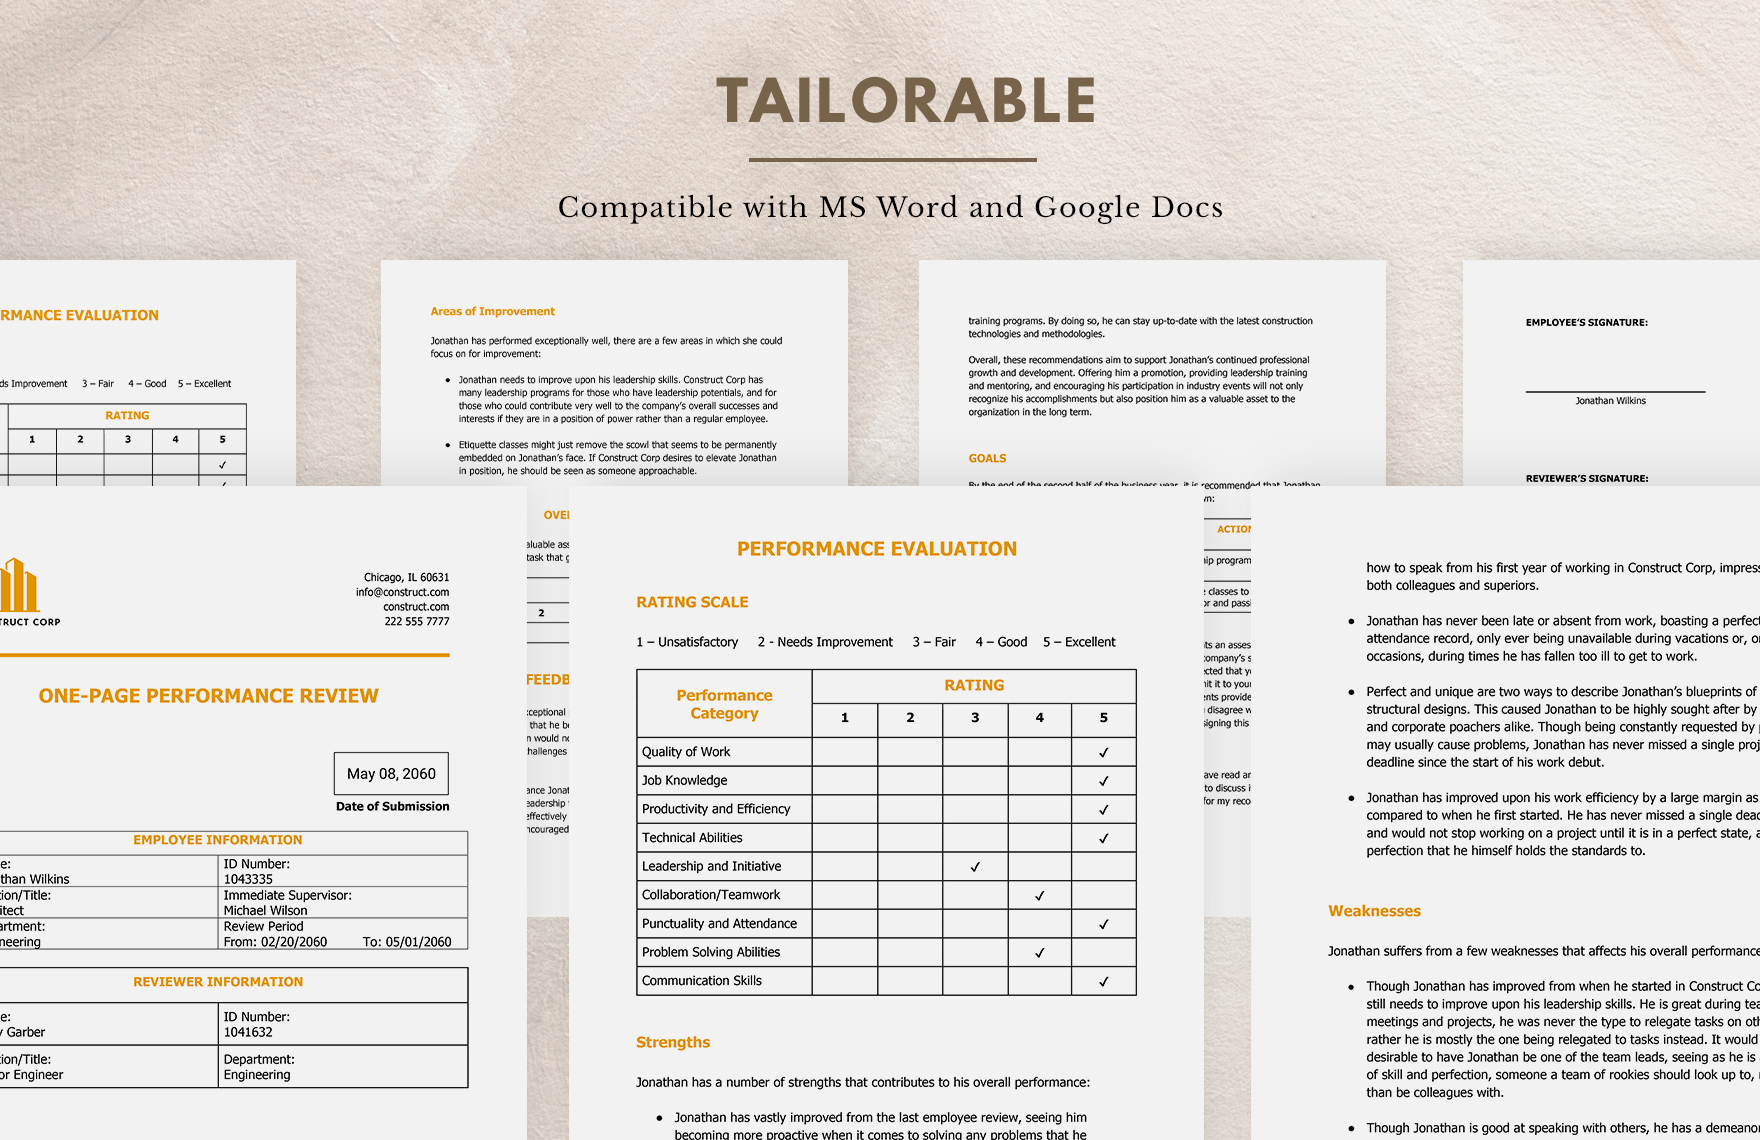 One-page Performance Review Template